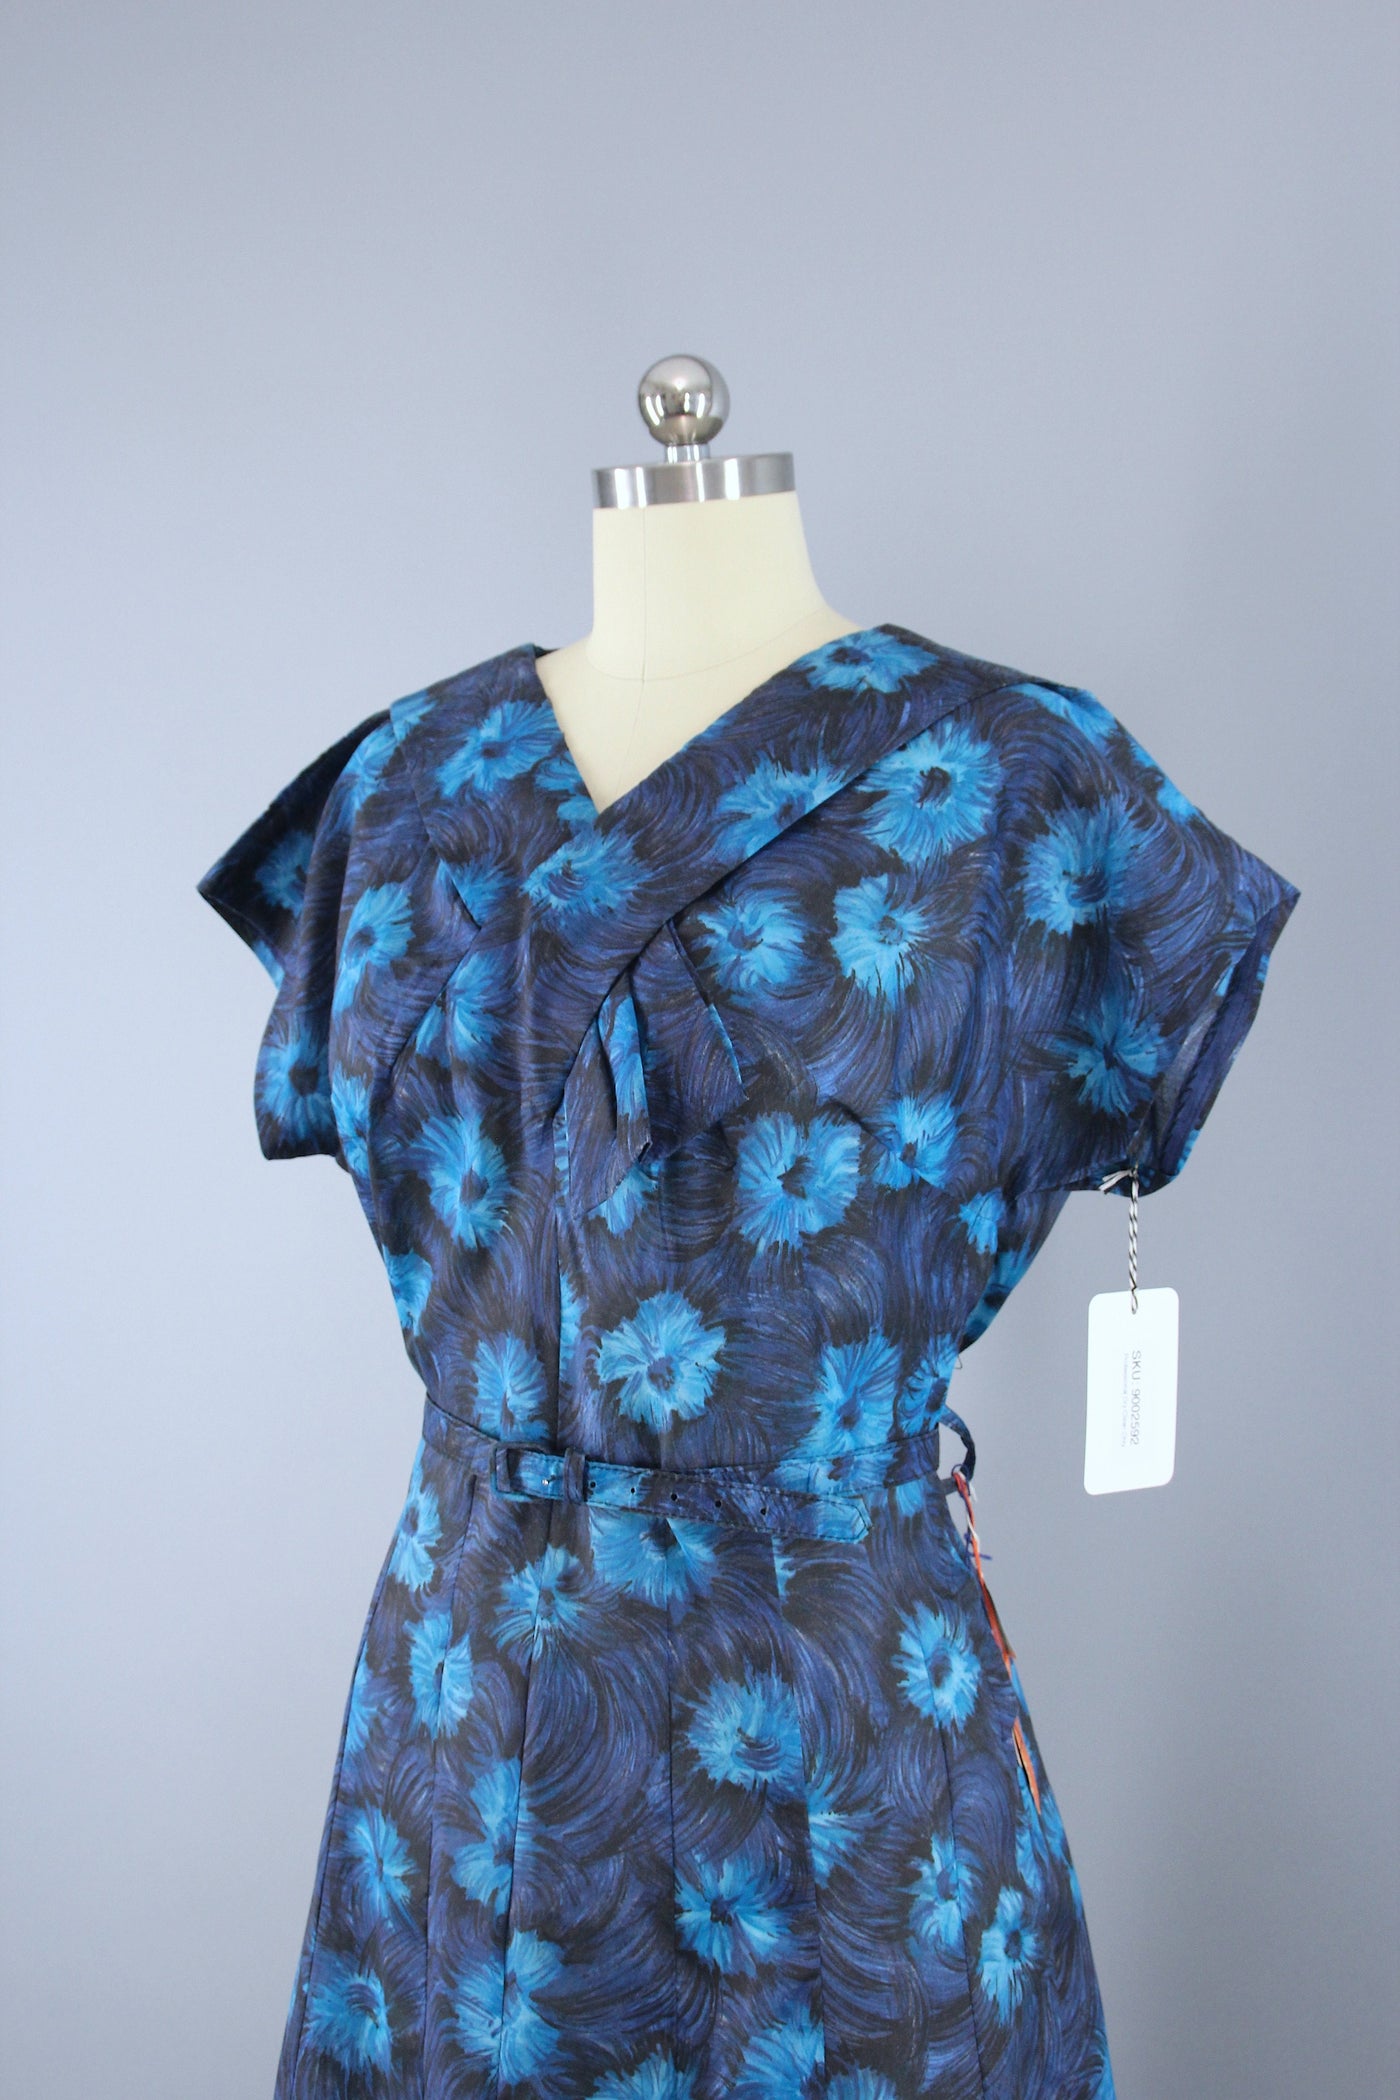 Vintage 1950s Blue Floral Print Day Dress – ThisBlueBird